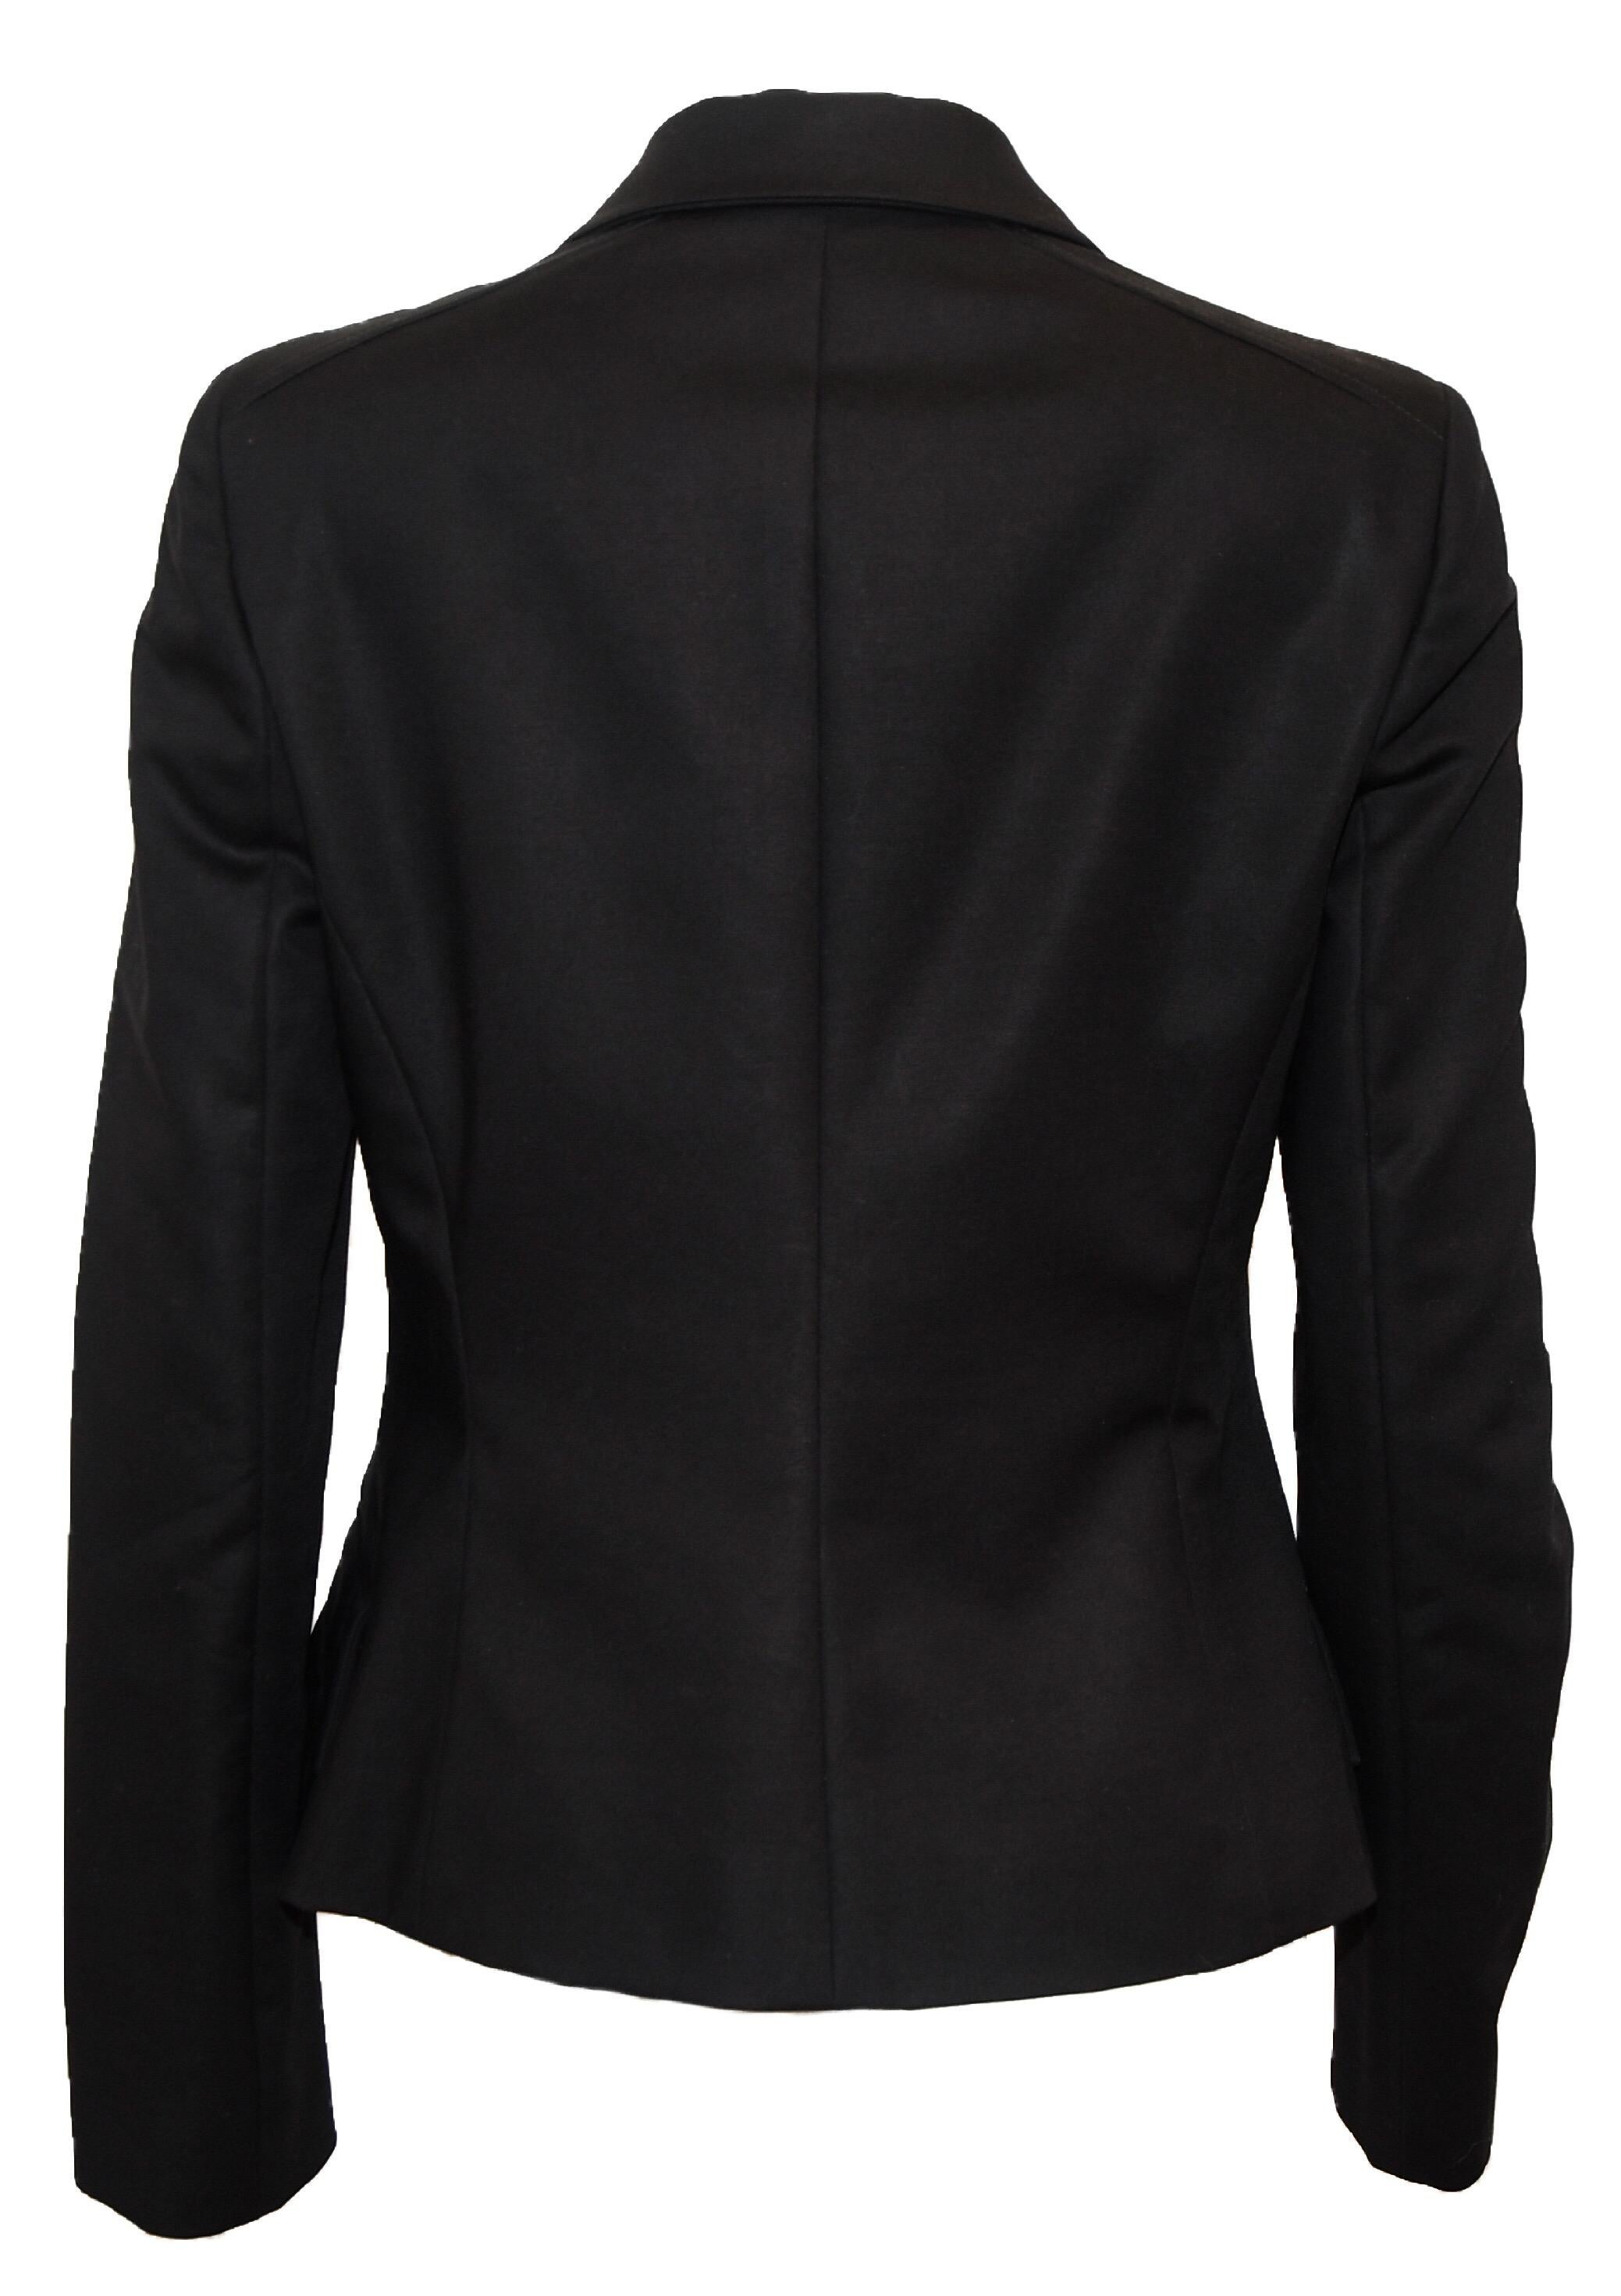 Versatile Versace Fitted Black Jacket With Peak Lapels 42 EU In Excellent Condition For Sale In Palm Beach, FL